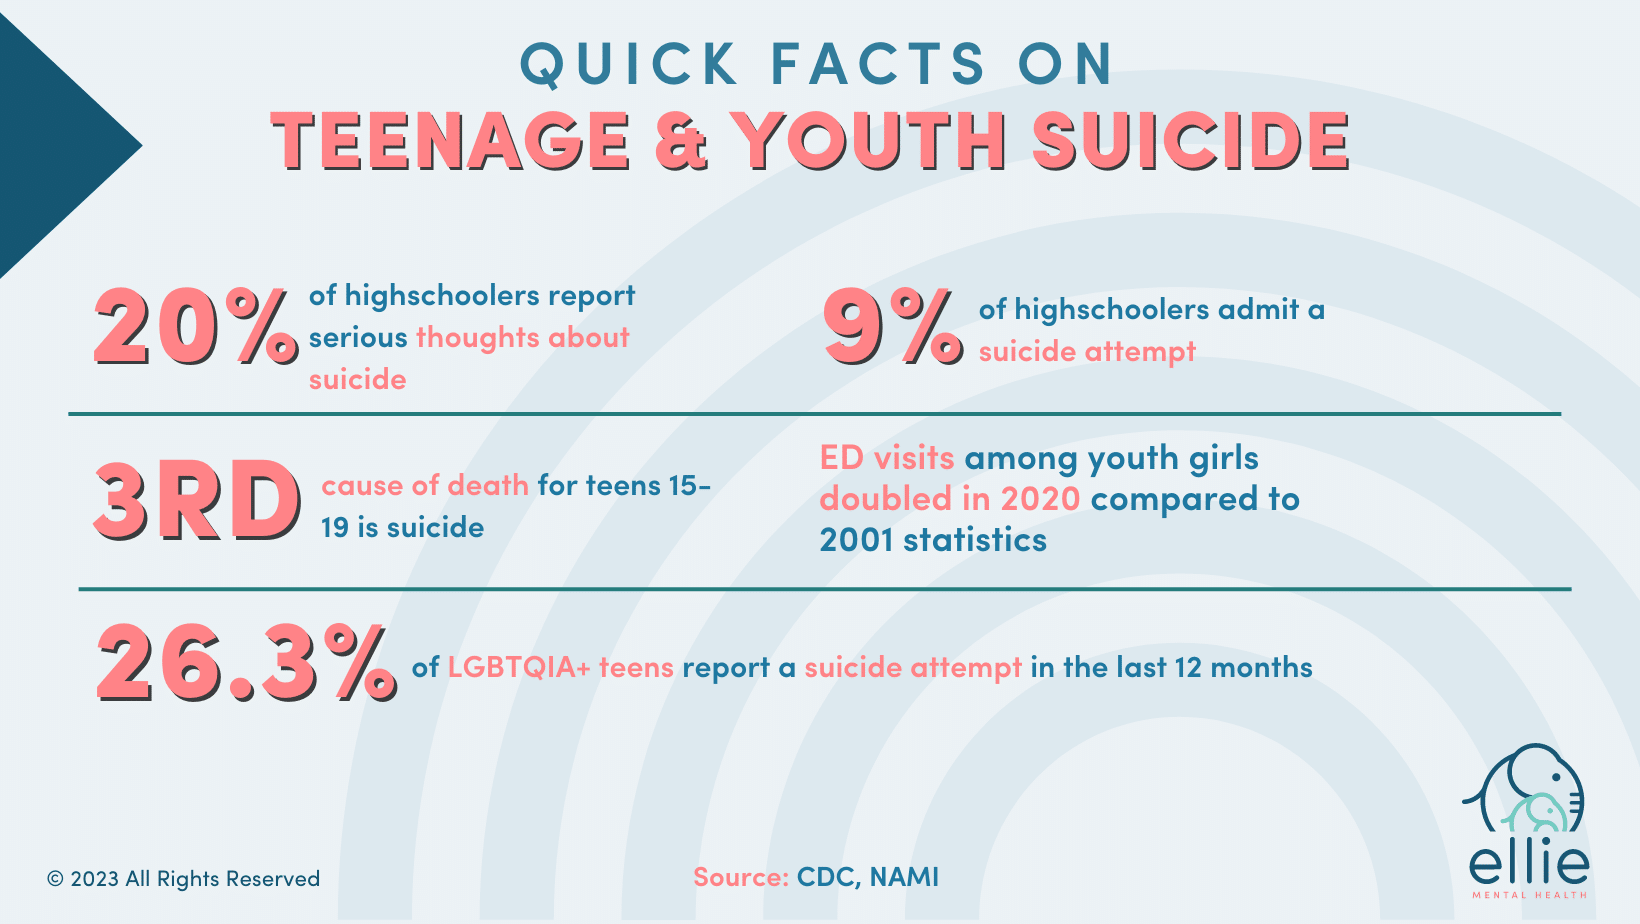 quick facts on teenage and youth suicide infographic